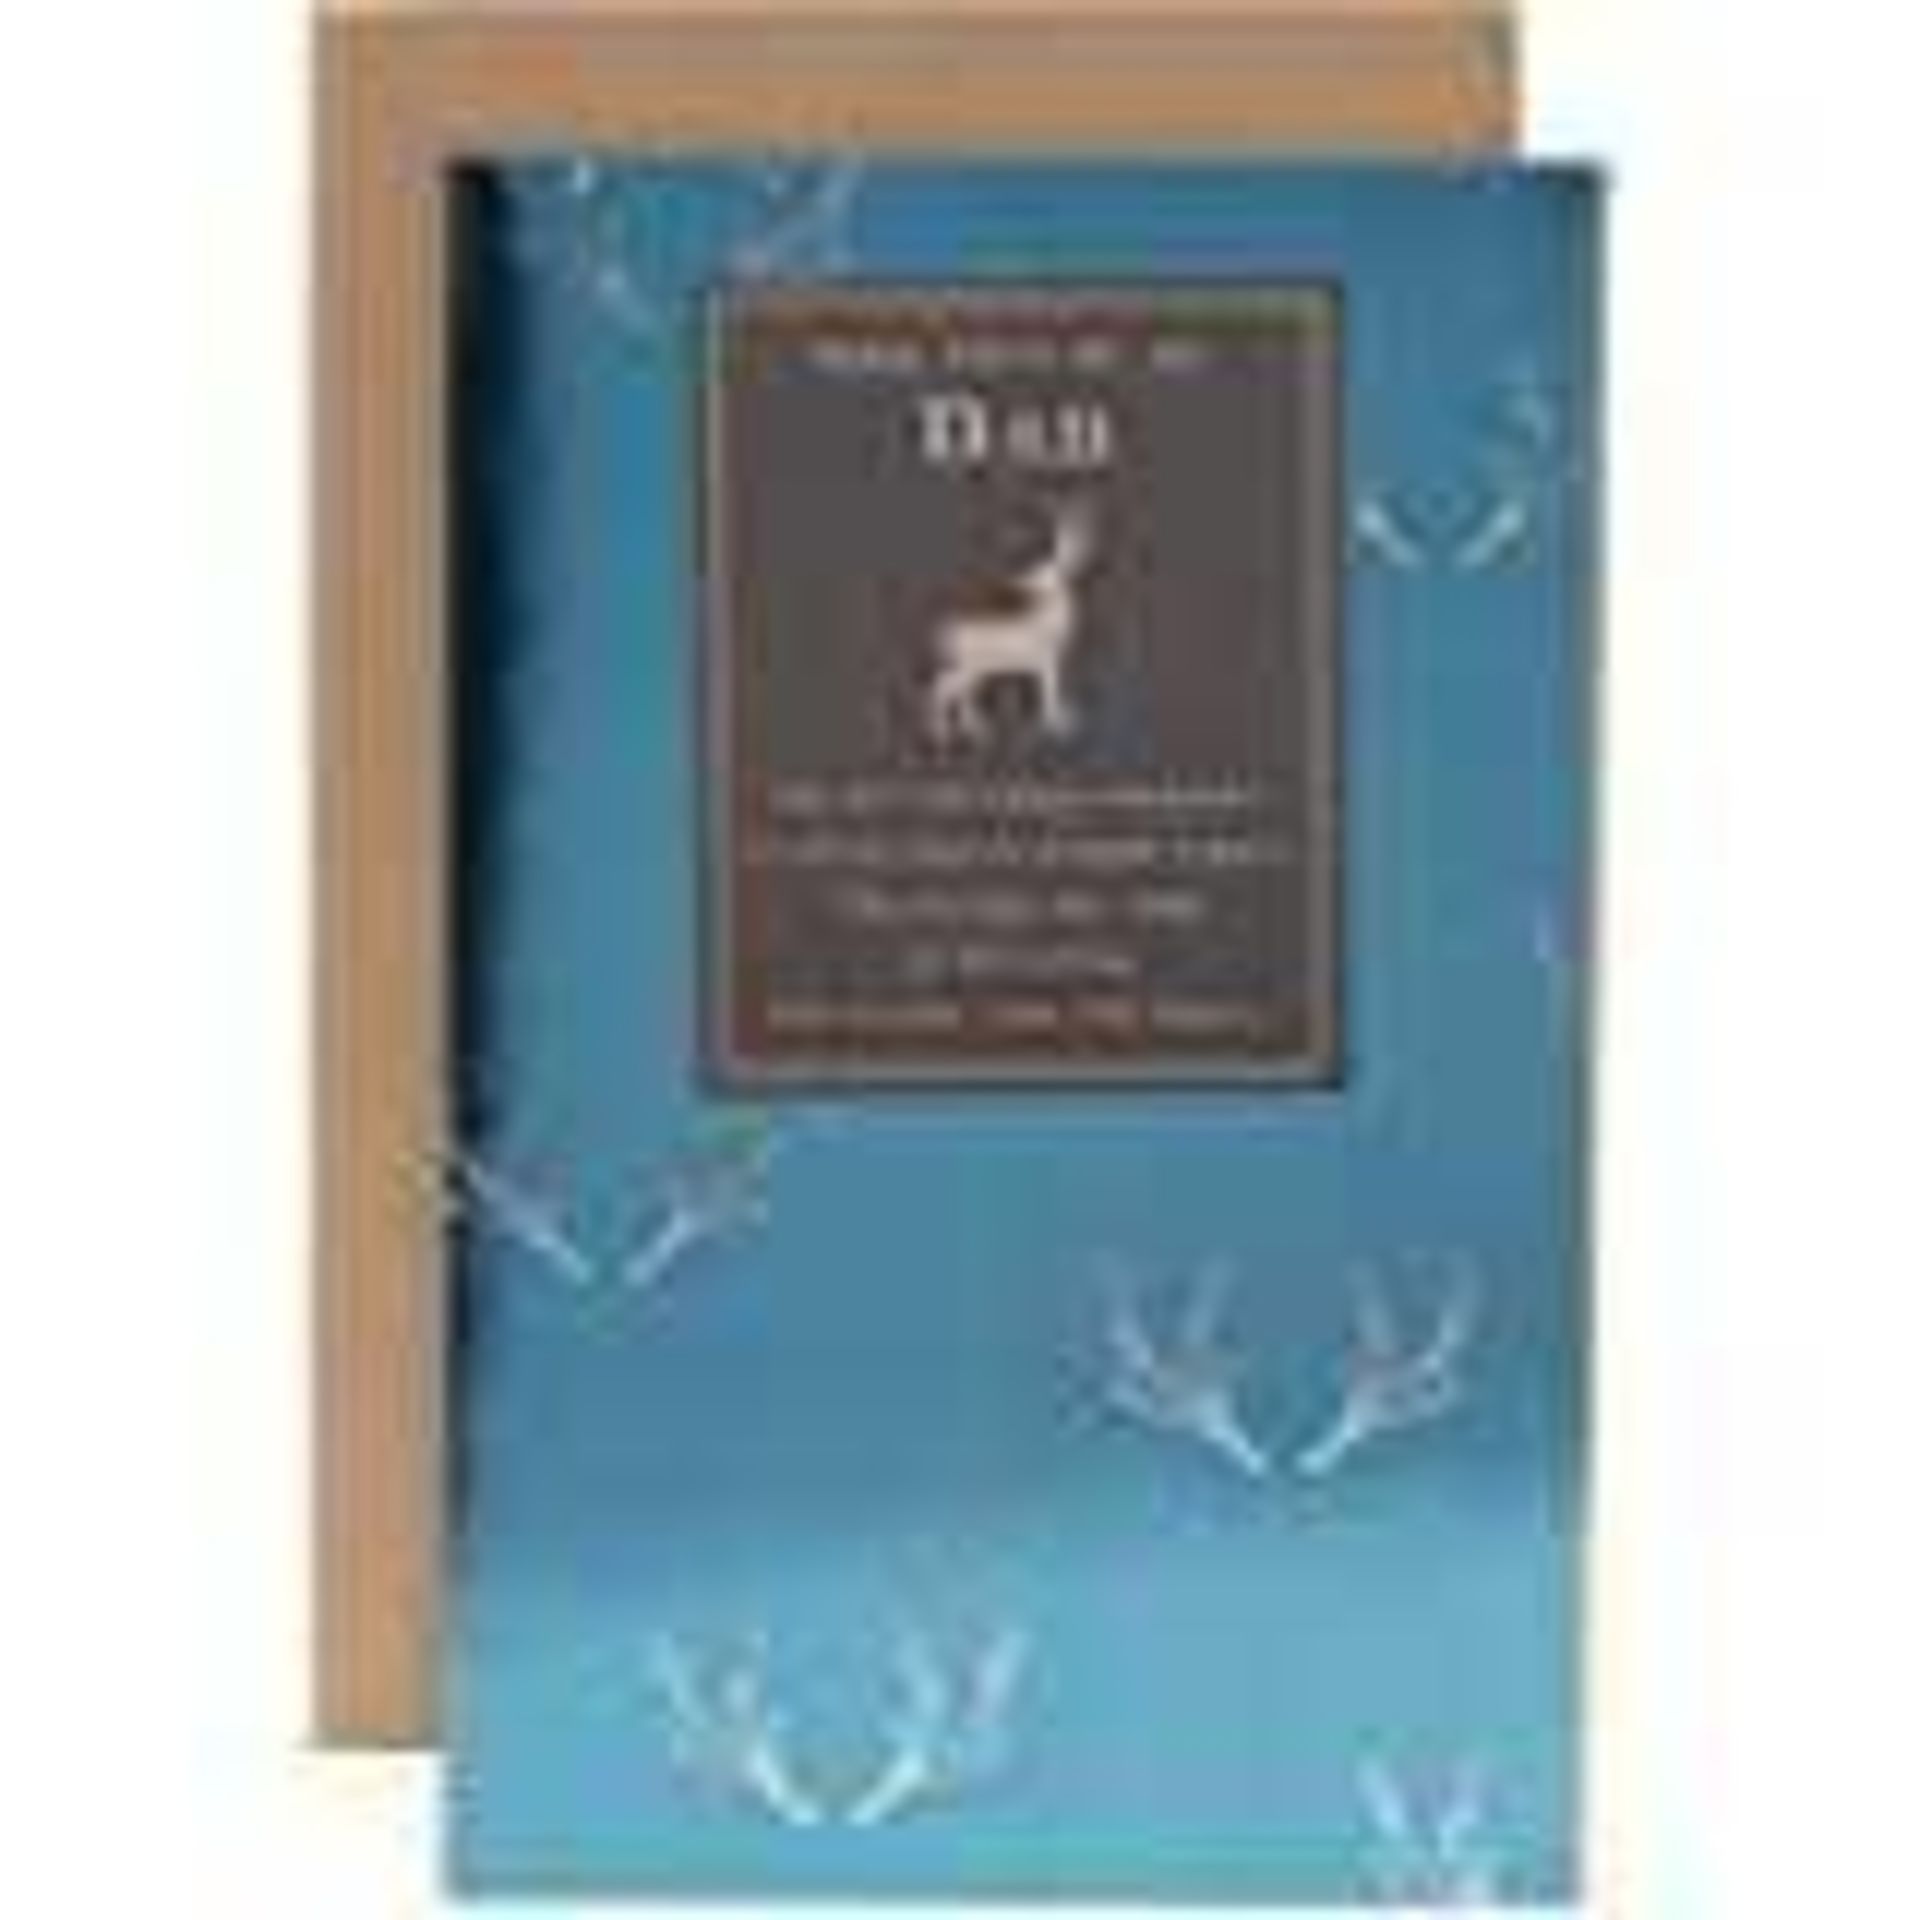 RRP £550 Brand New And Sealed (198 Items) Hallmark Christmas Card For Dad From Both - Contemporary 3